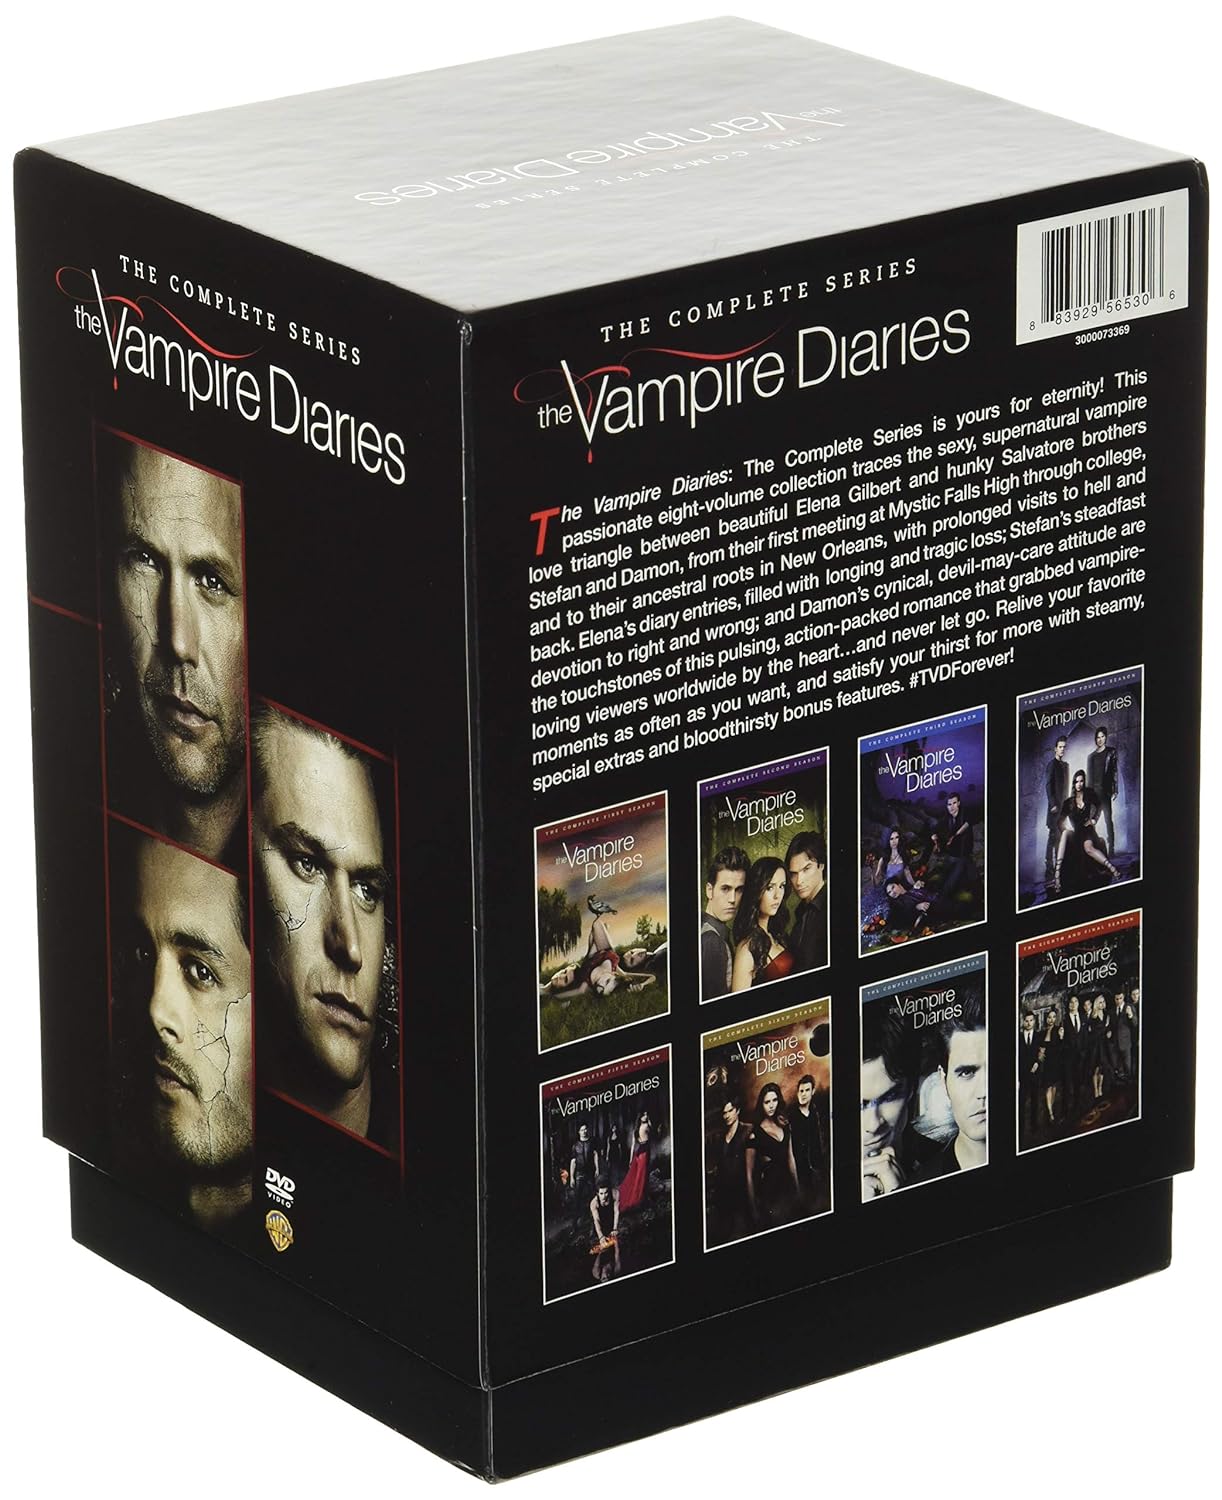 The Vampire Diaries: The Complete Series [DVD Box Set]